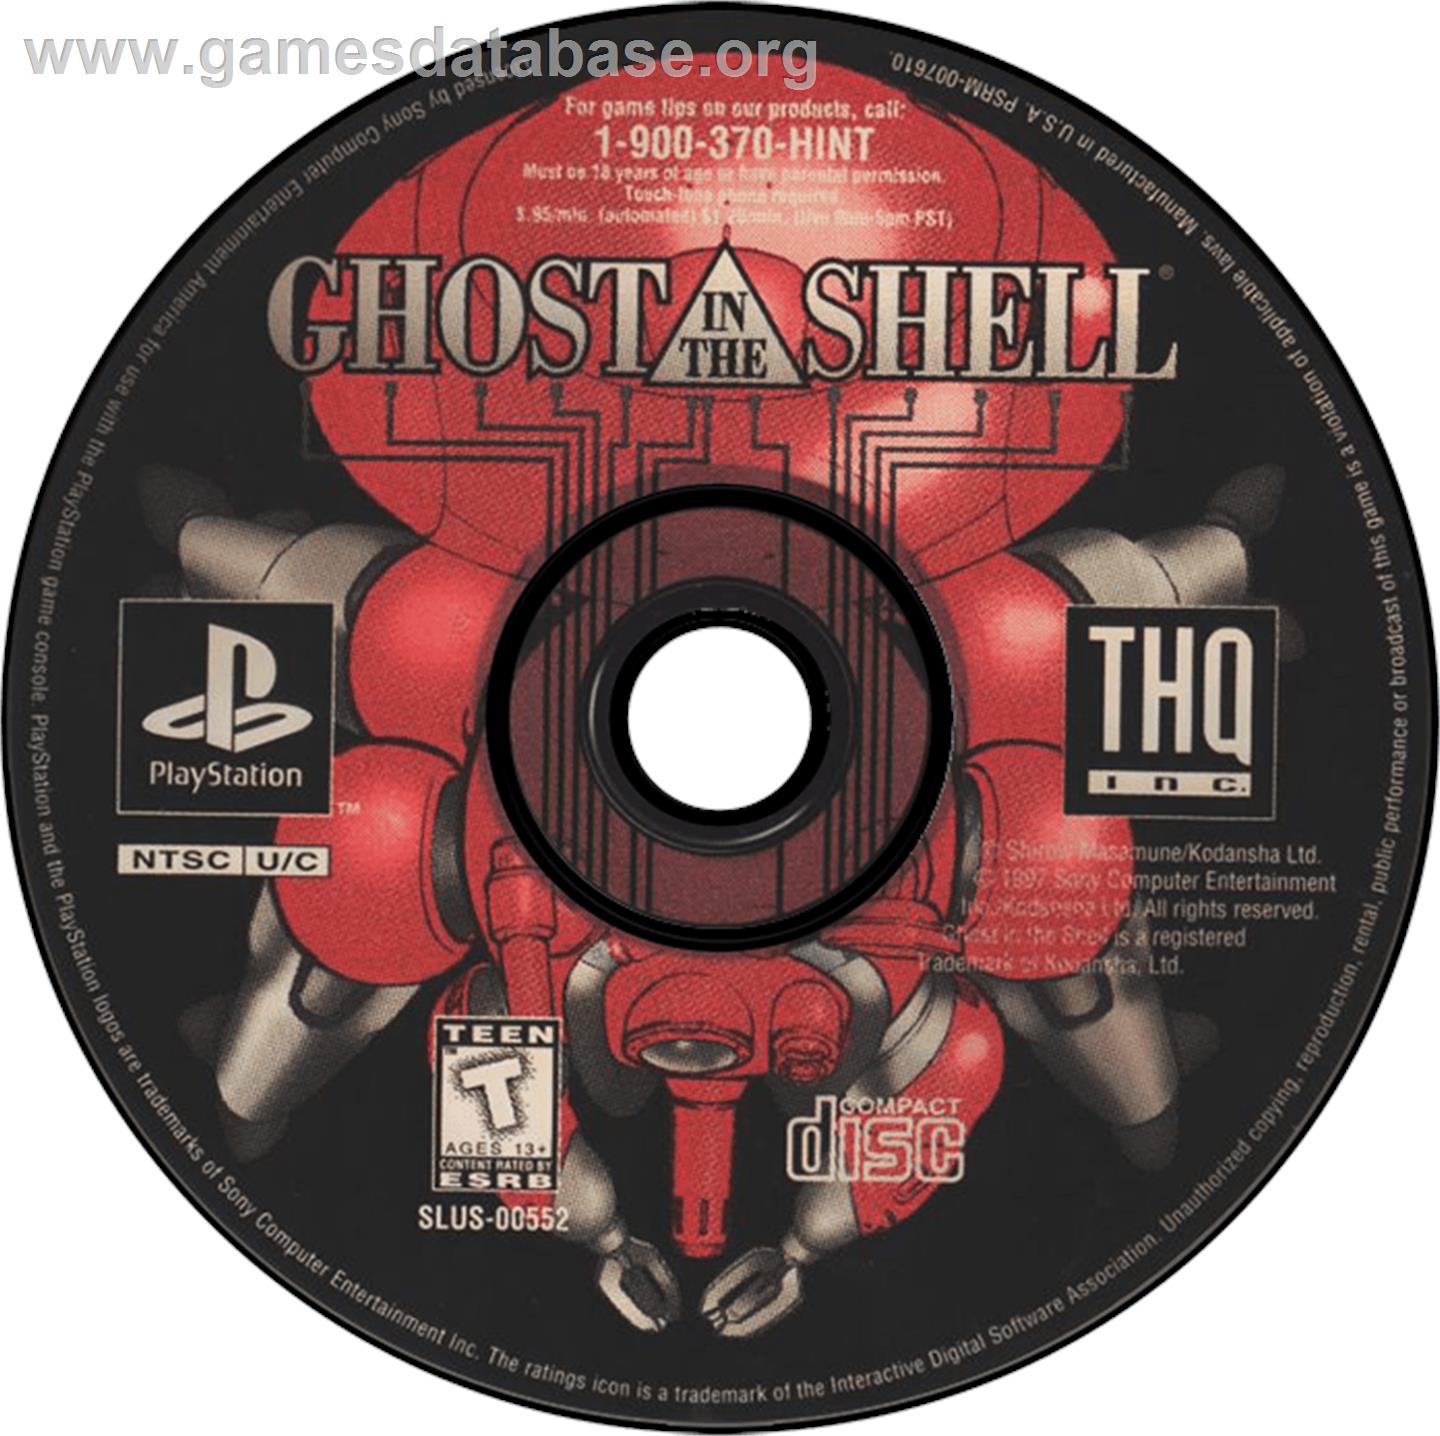 Ghost in the Shell - Sony Playstation - Artwork - Disc